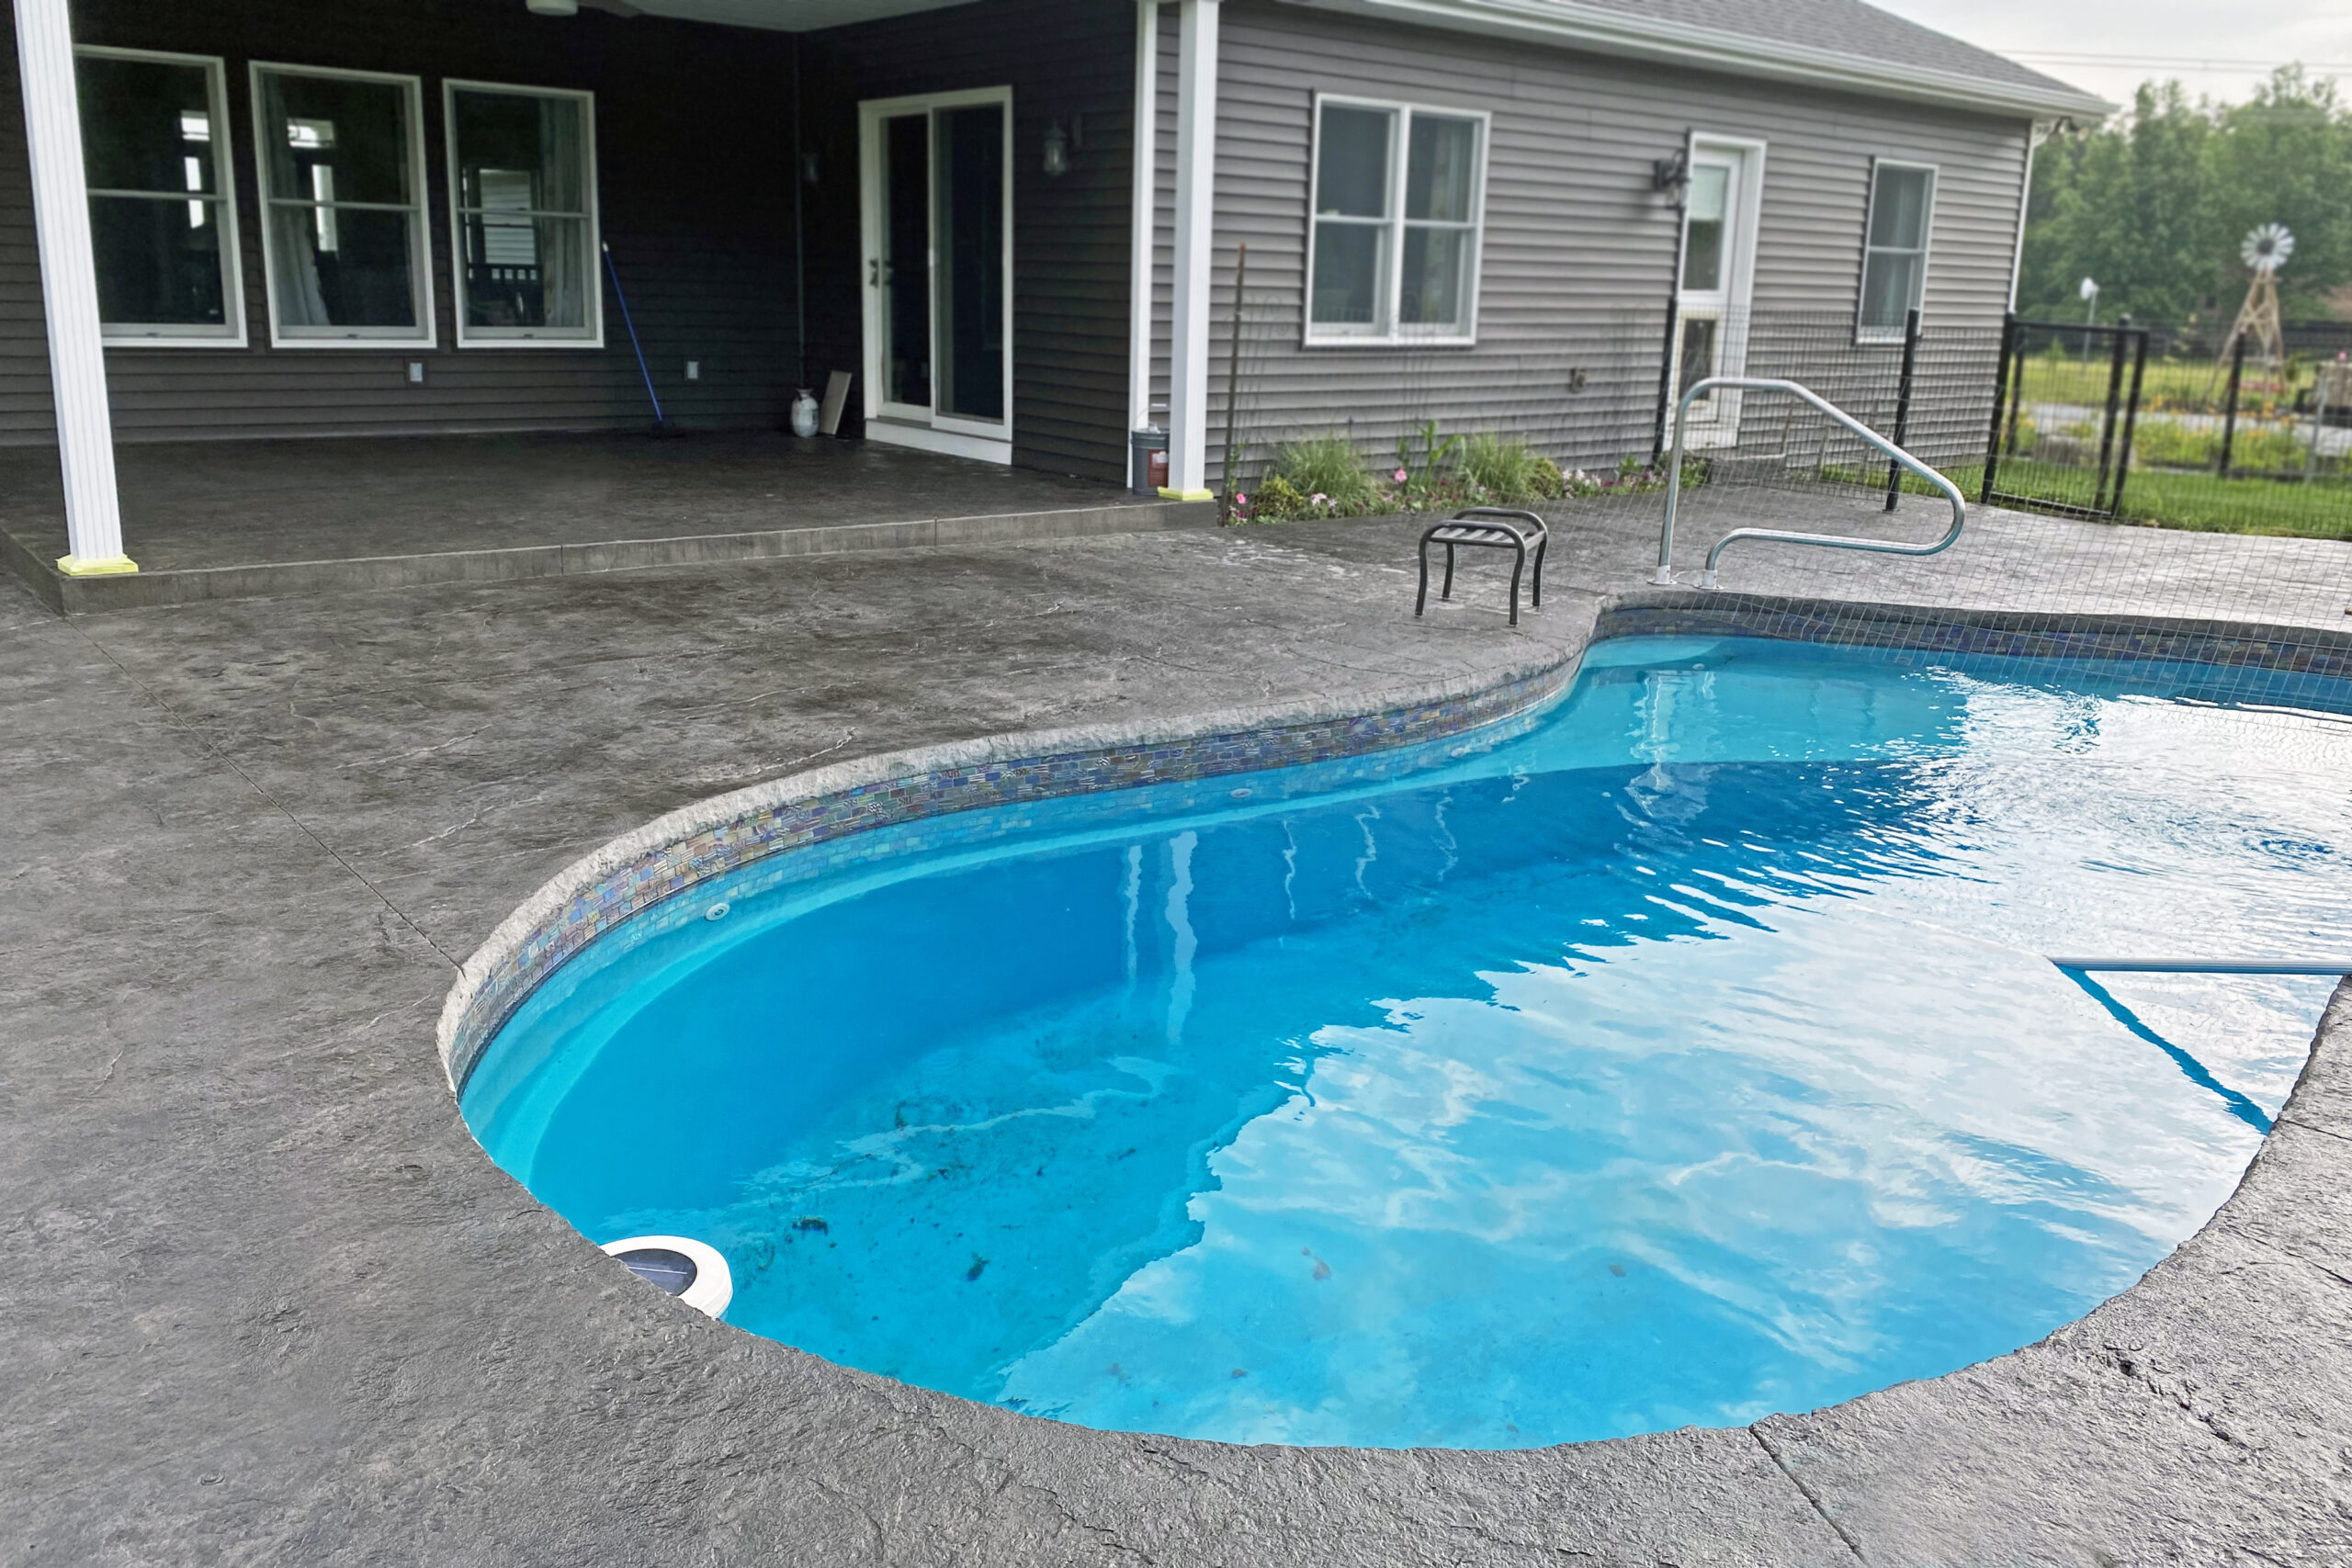 Refinished Stamped Concrete Pool Deck with Charcoal Antiquing Stain